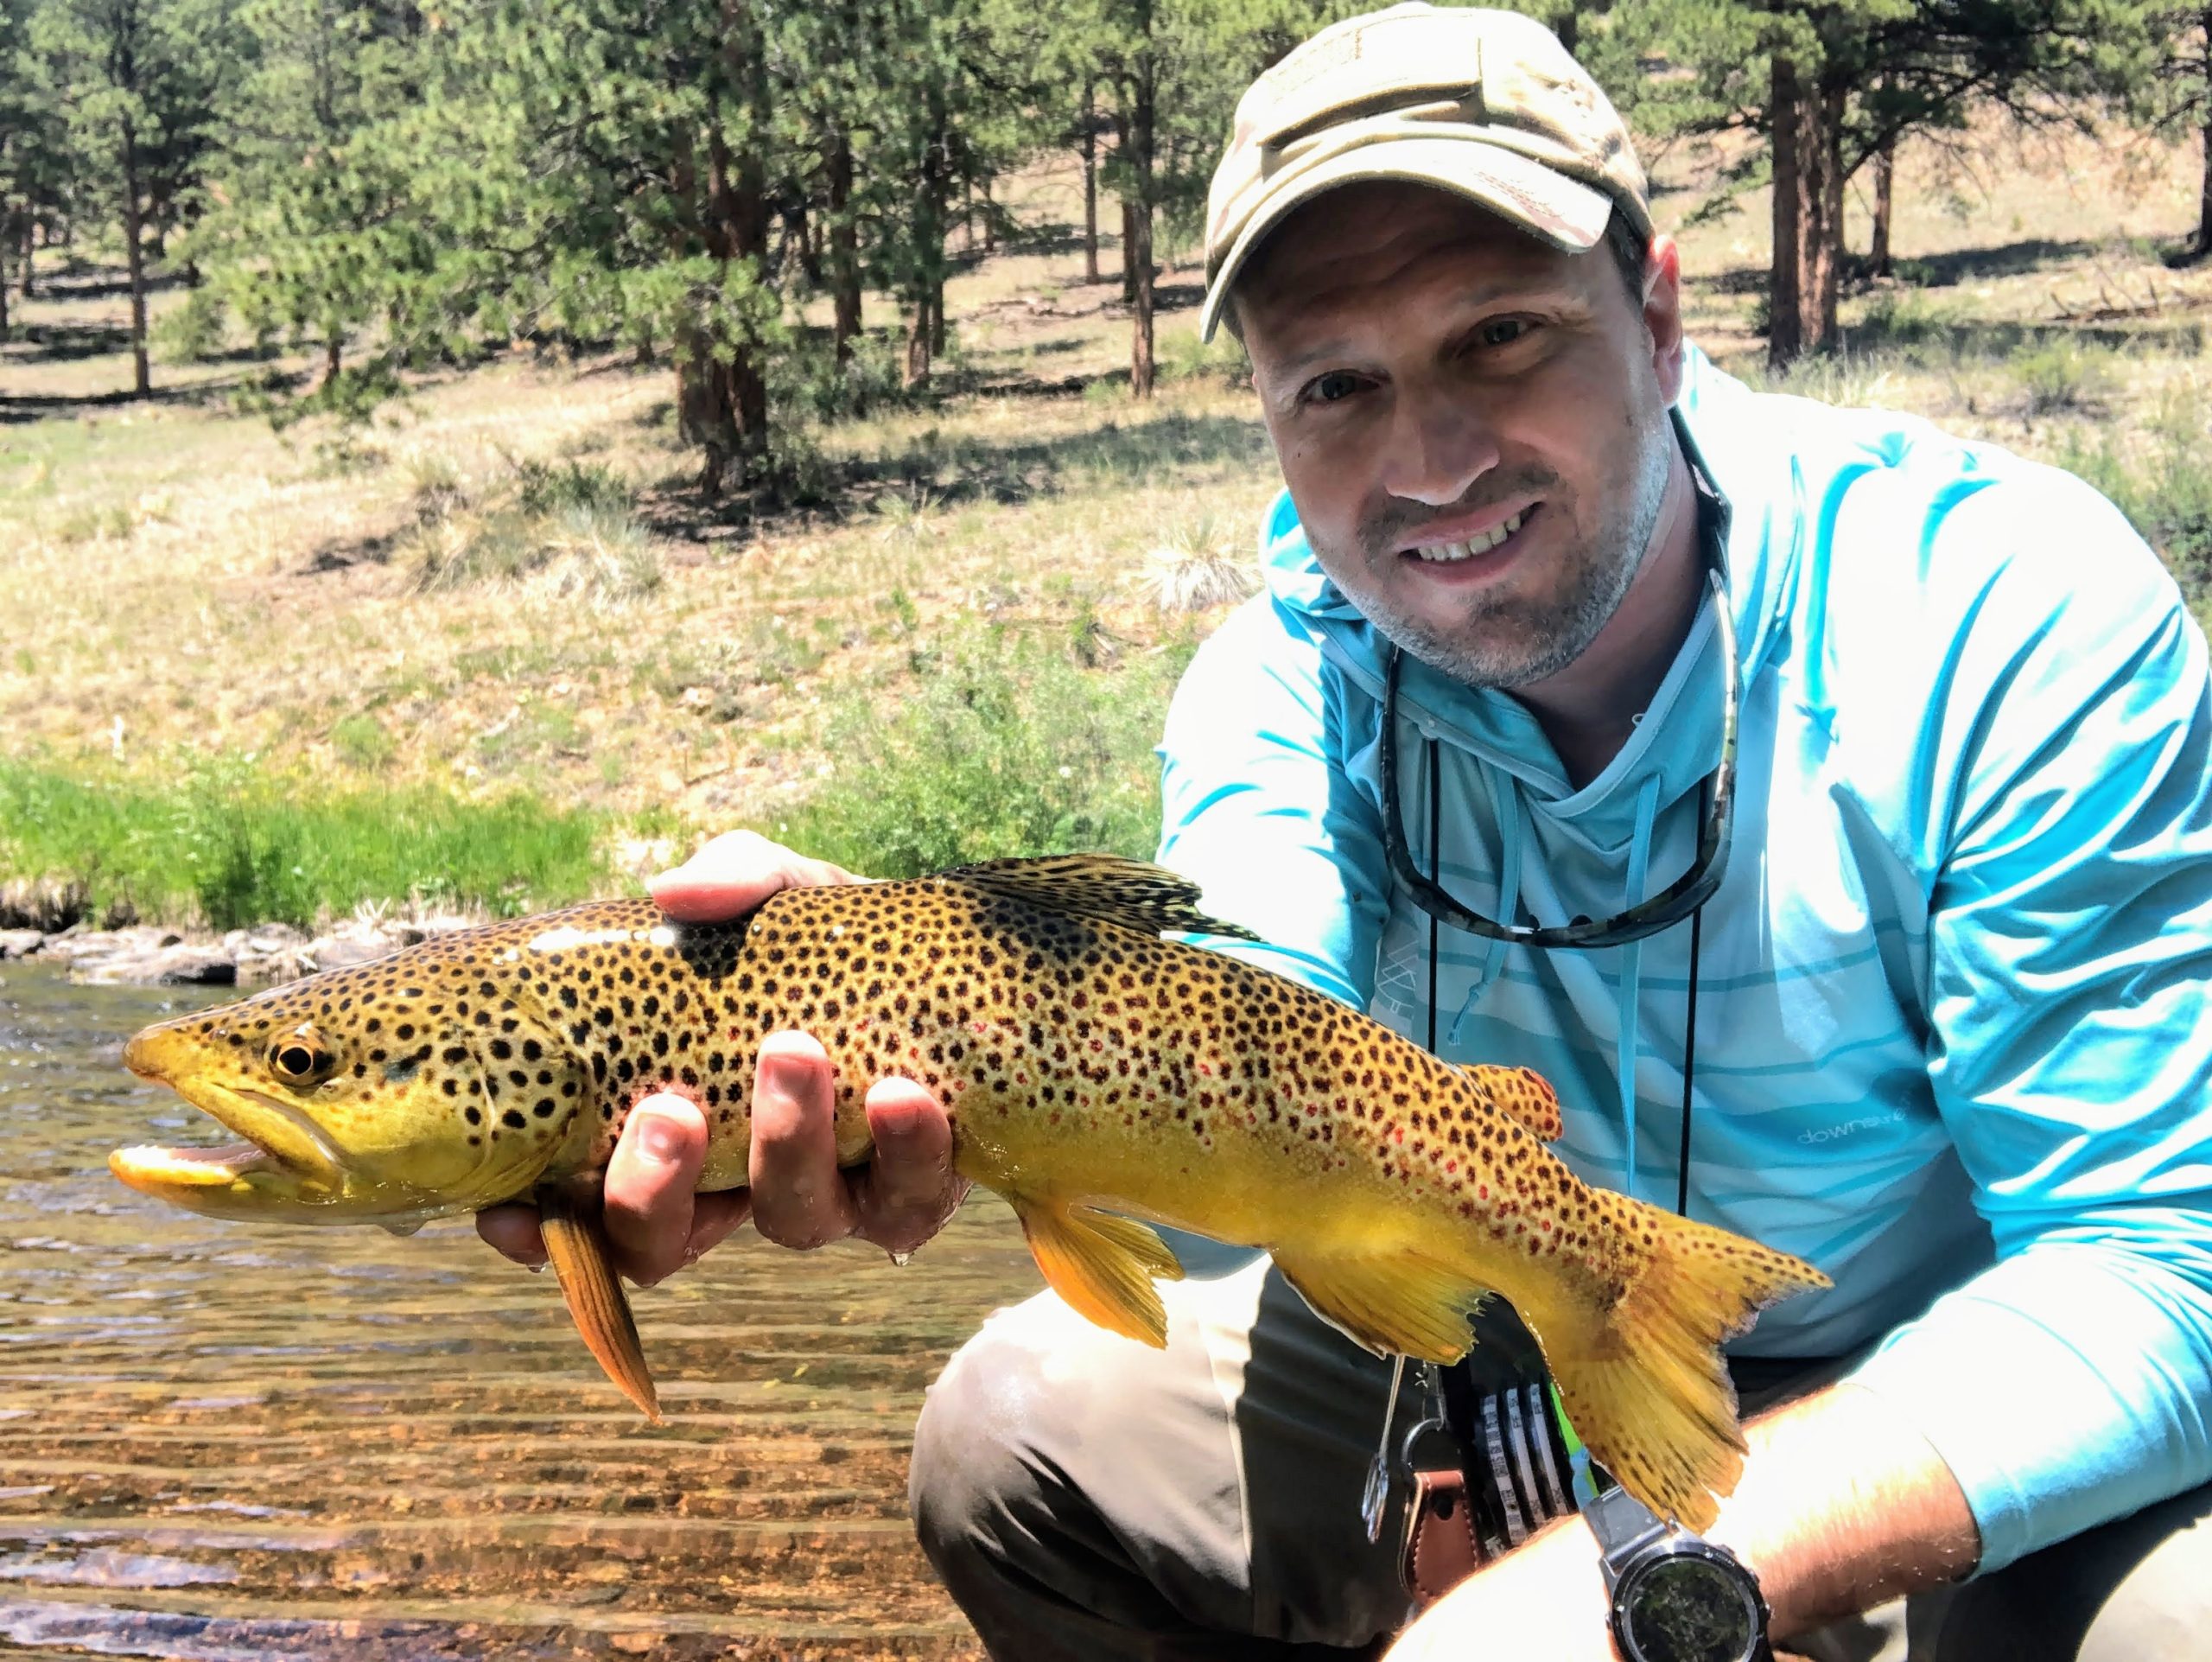 How to Fly Fish: Fly Fishing For Trout (go fishing, angle, cast